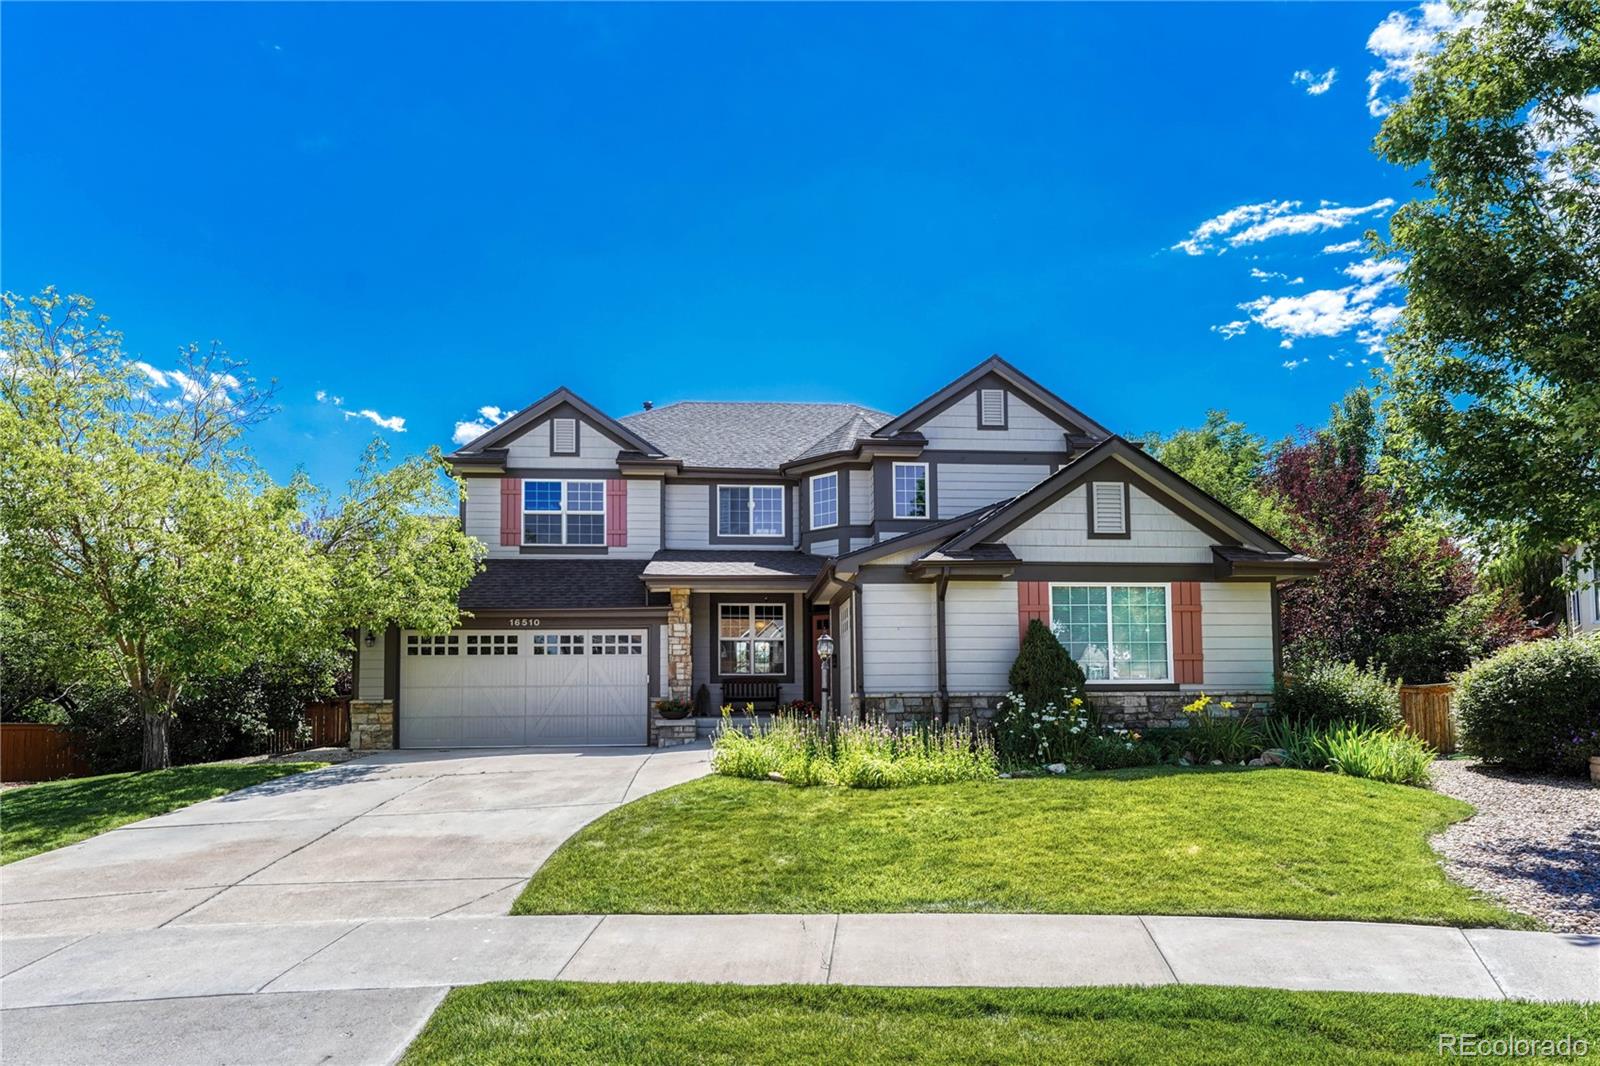 Report Image for 16510  Stonefeld Place,Parker, Colorado